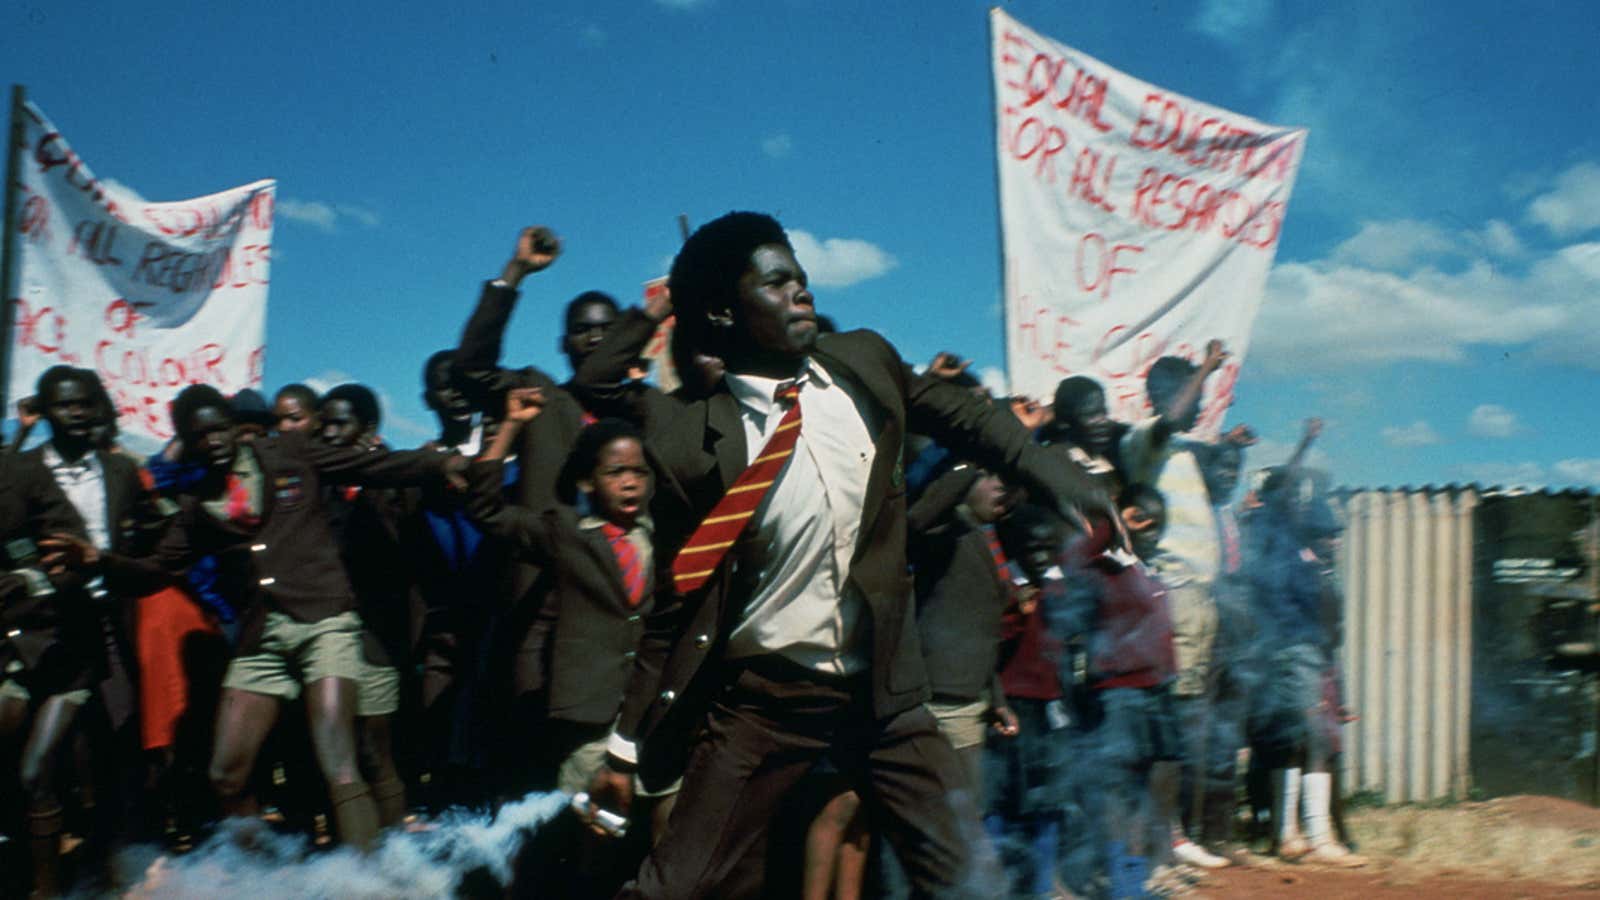 A reenactment of the 1976 Student Uprising in Soweto in A Dry White Season